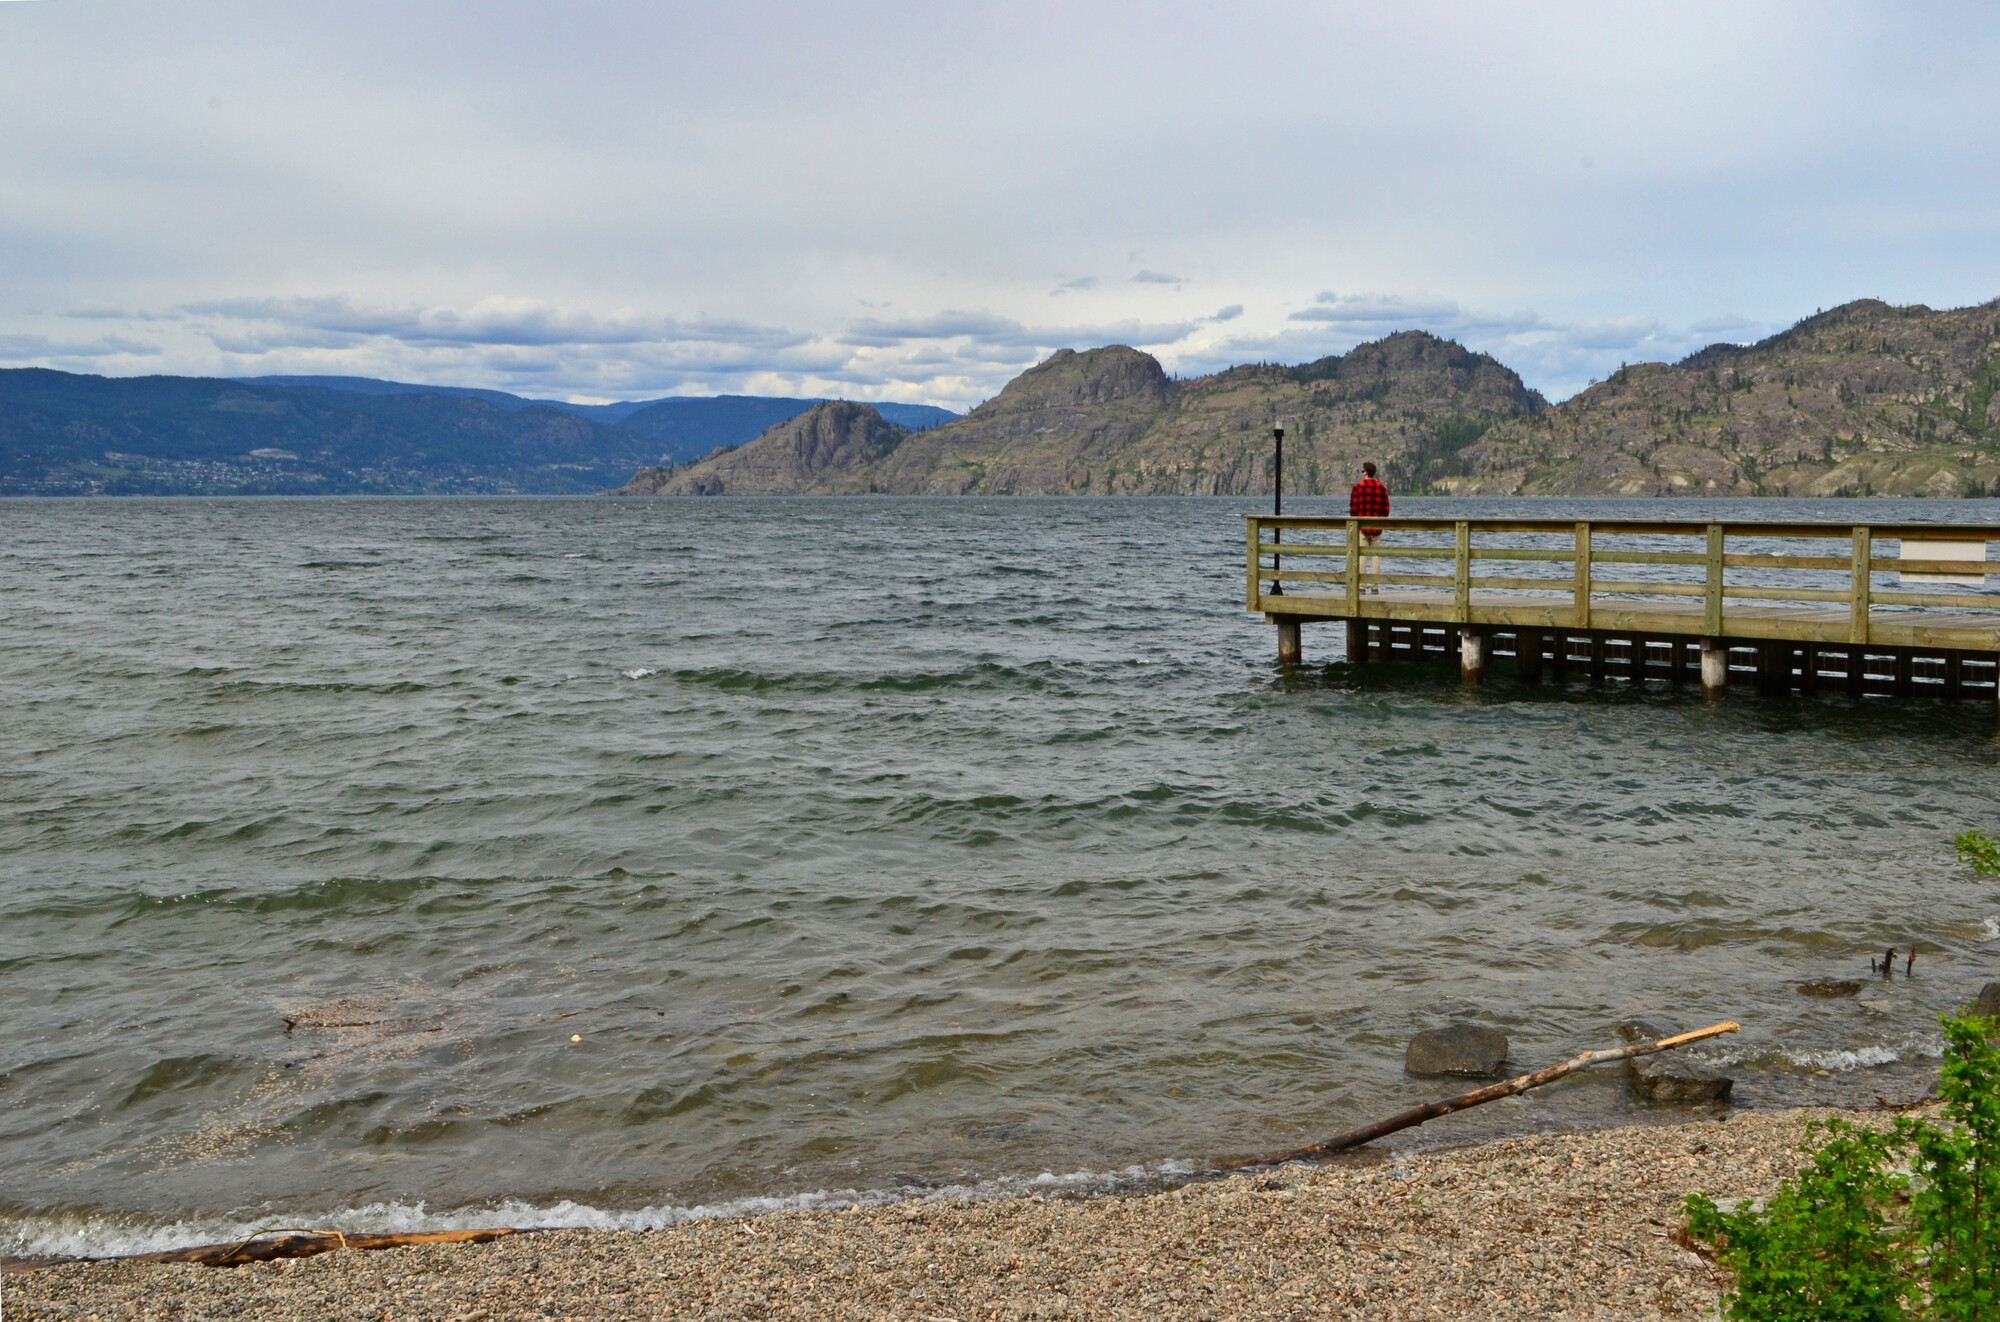 Lake waves crash on shore while someone overlooks the mountains from the dock